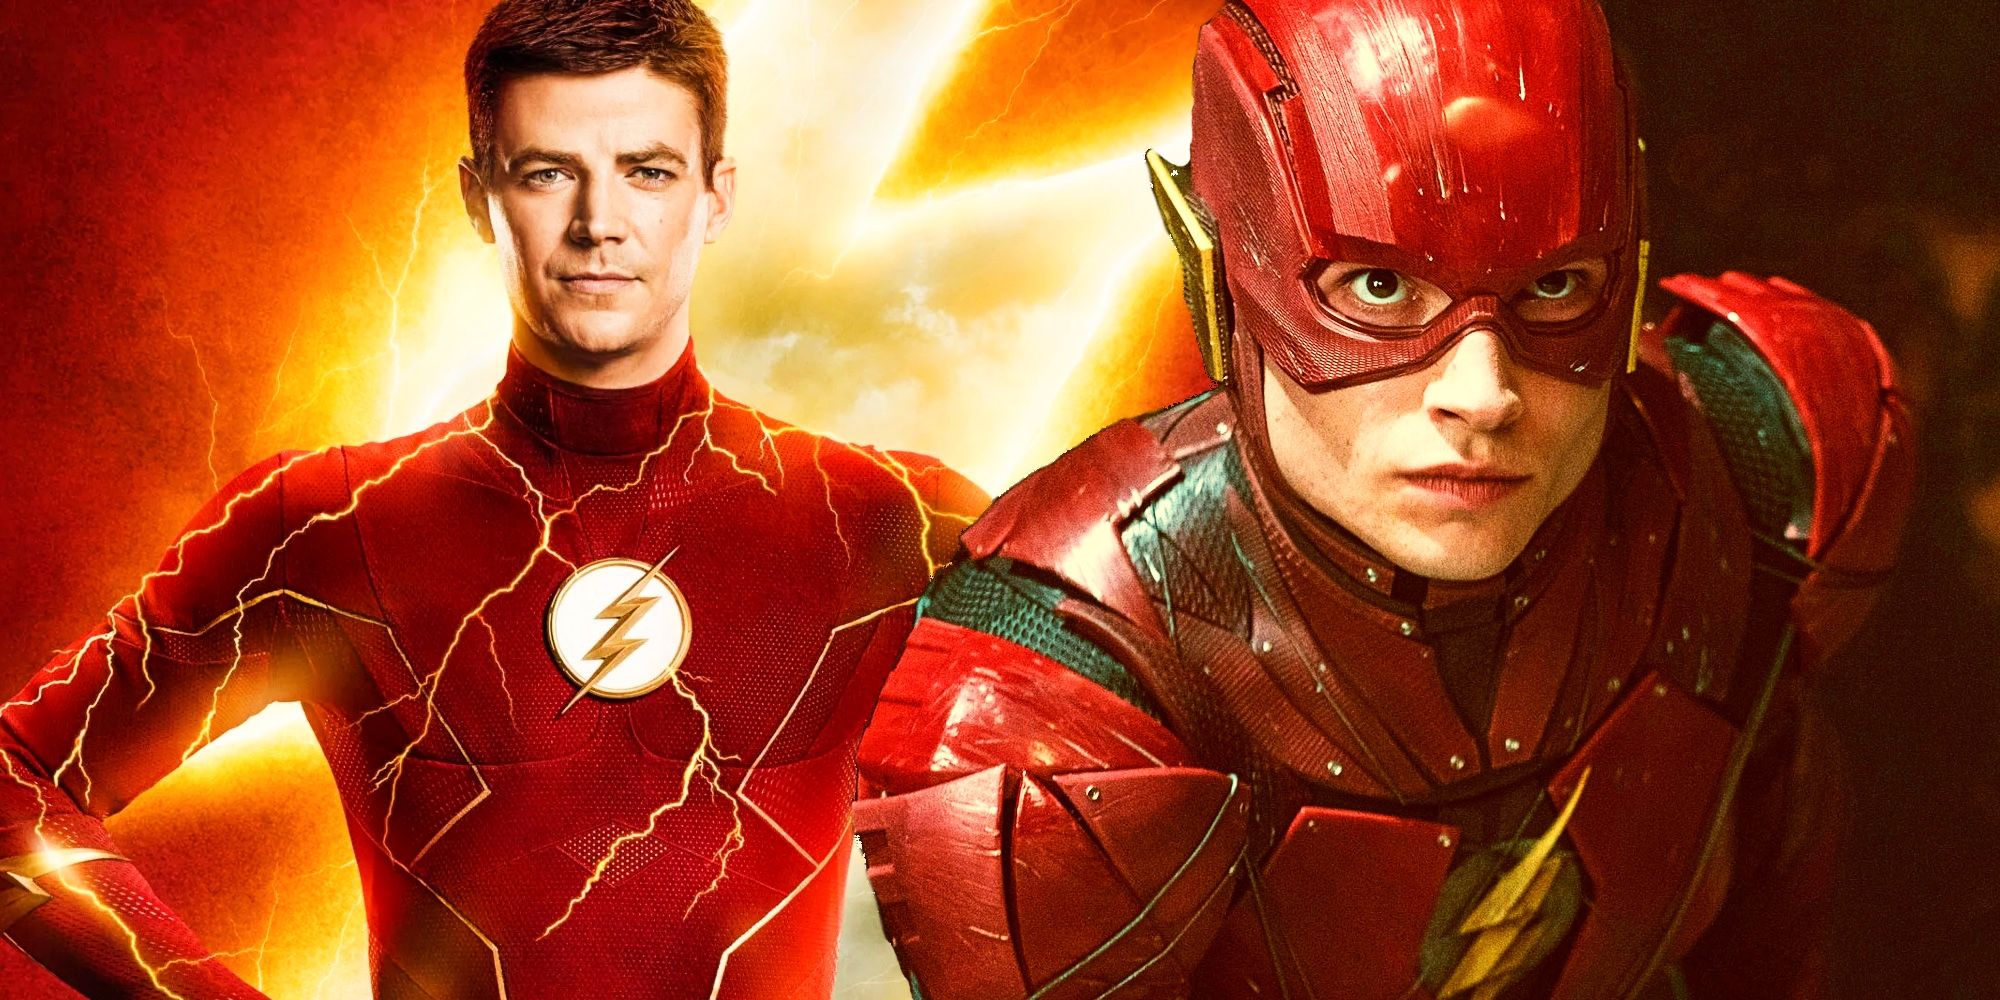 10 Ways Grant Gustin Could Return As Barry Allen After The Flash Ends